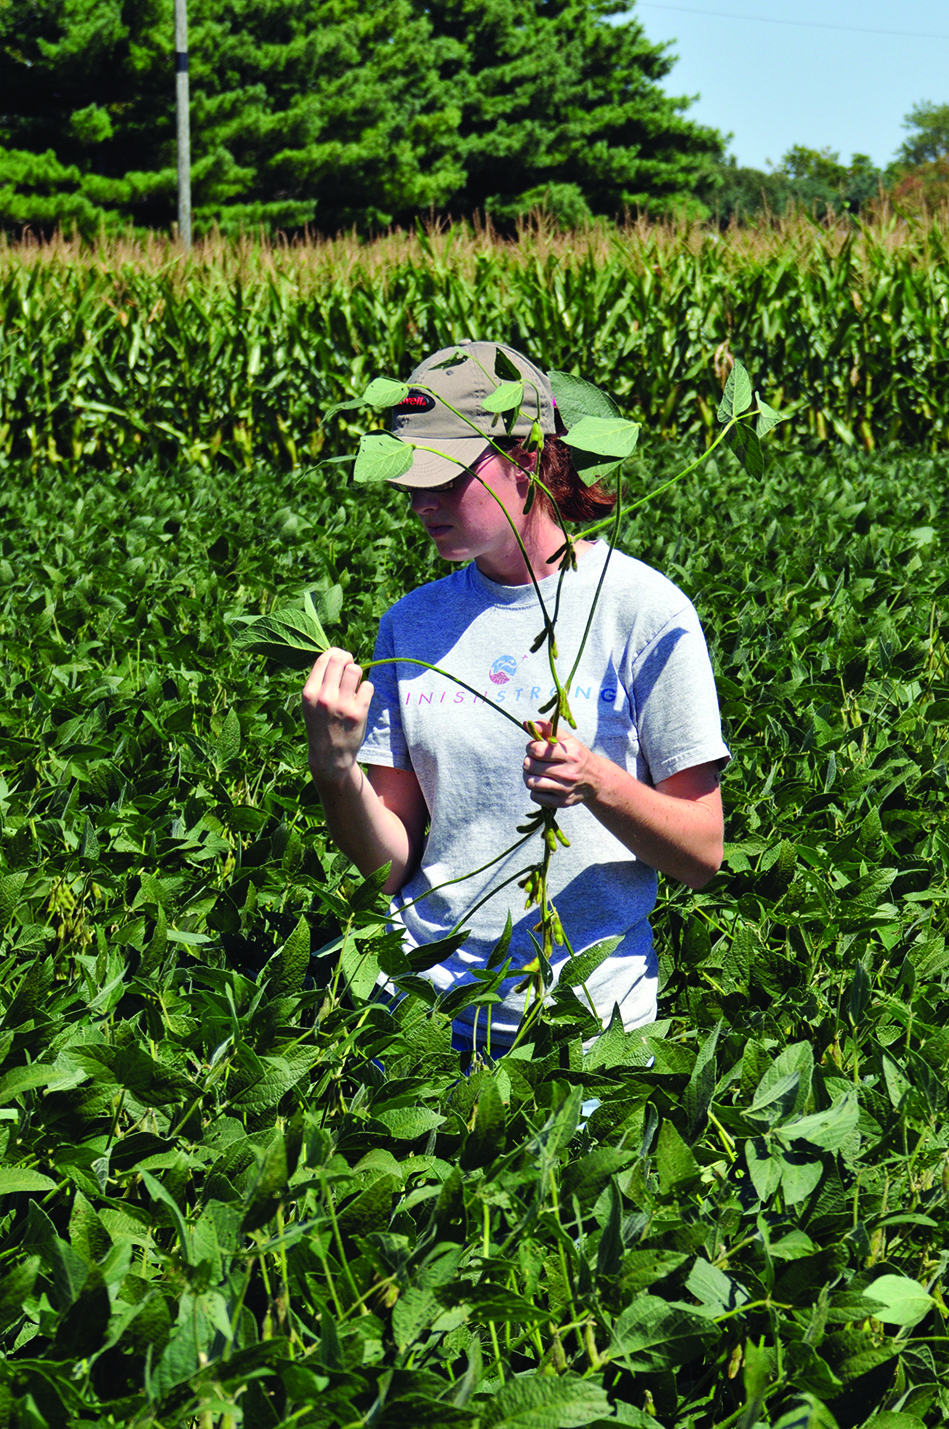 Figure 8. Scouting fields helps detrmine whether insect pest populations are at a level that warrant treatment.